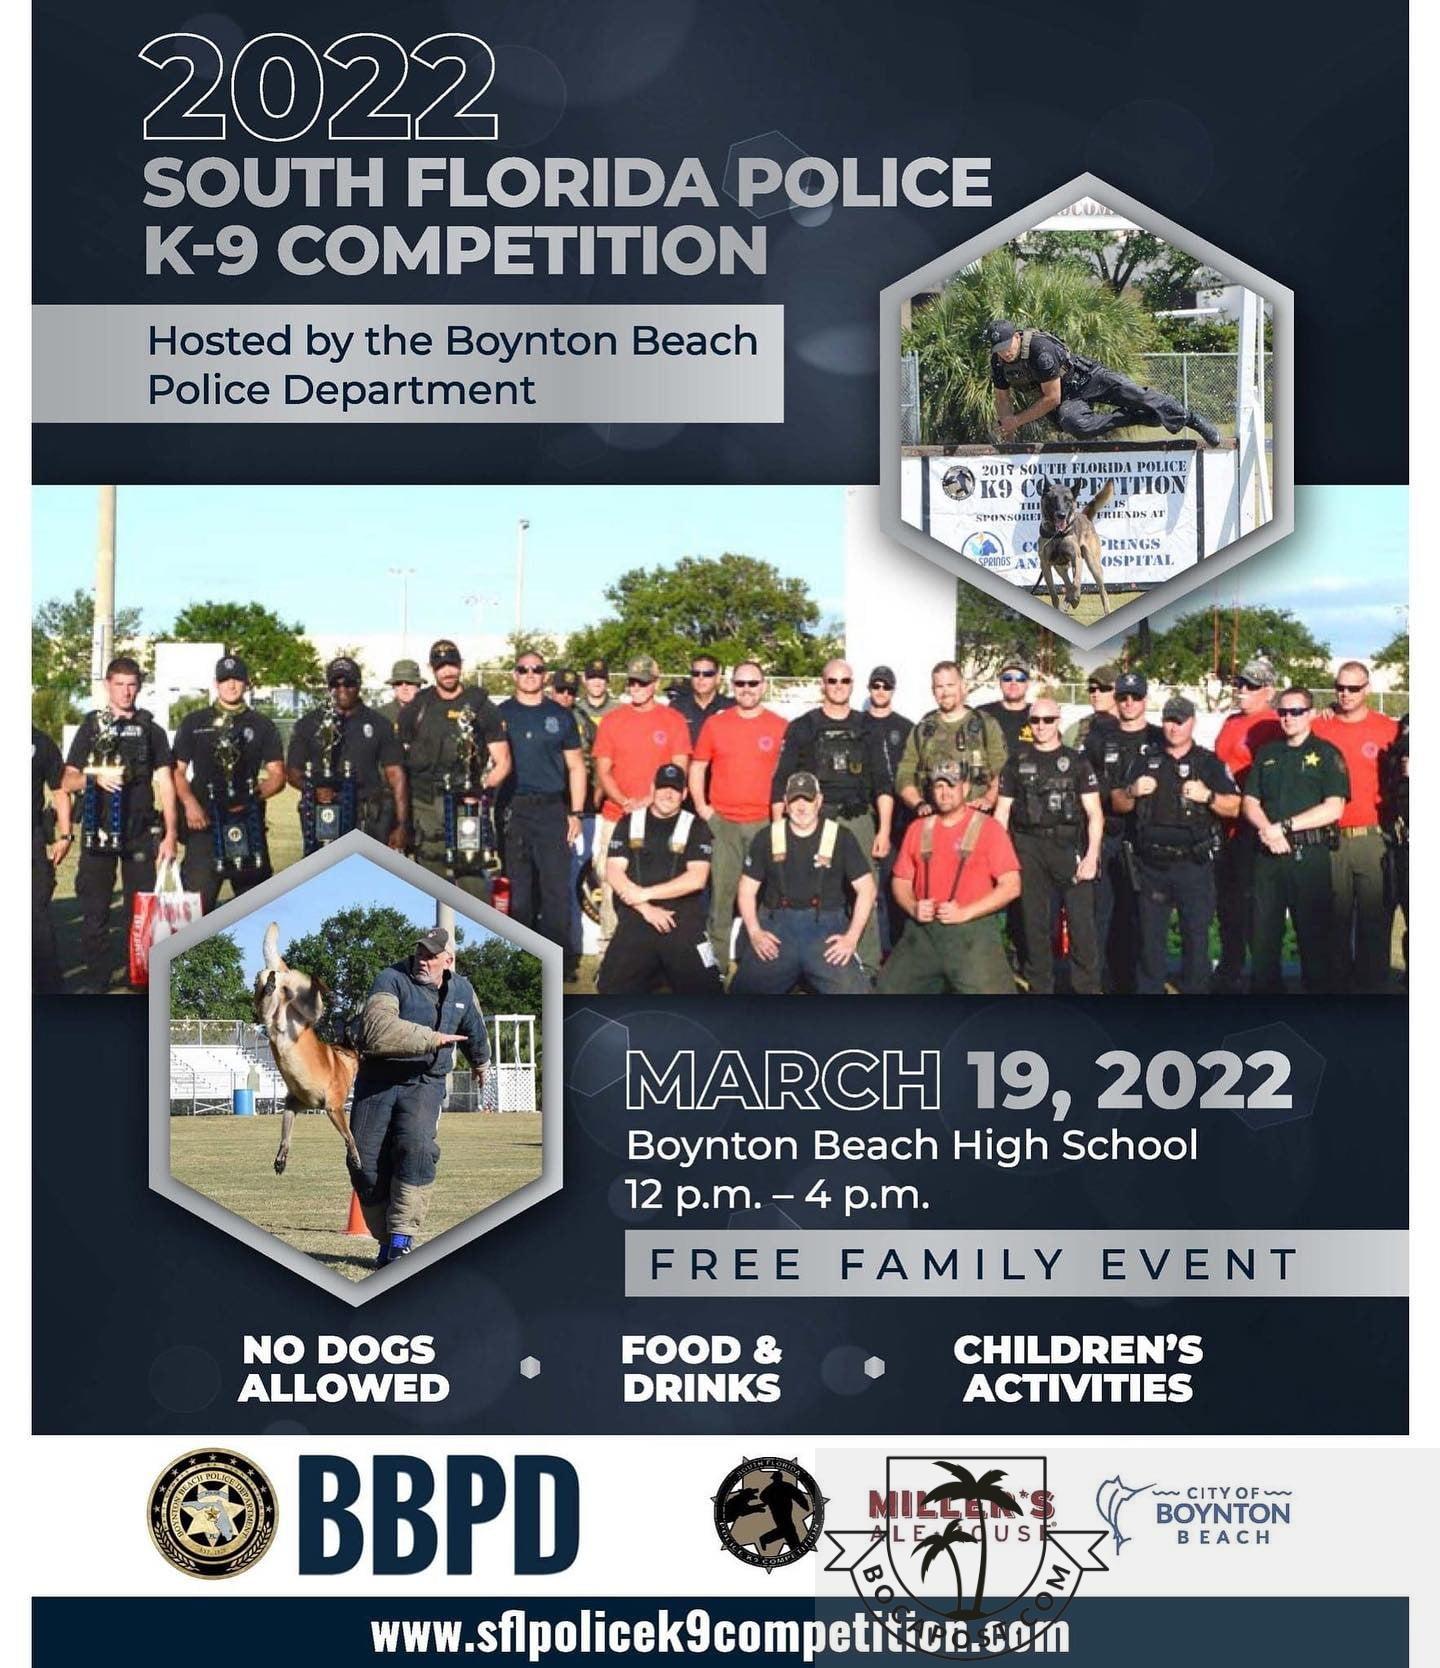 THIS WEEKEND: 2022 South Florida Police K-9 Competition In Boynton Beach